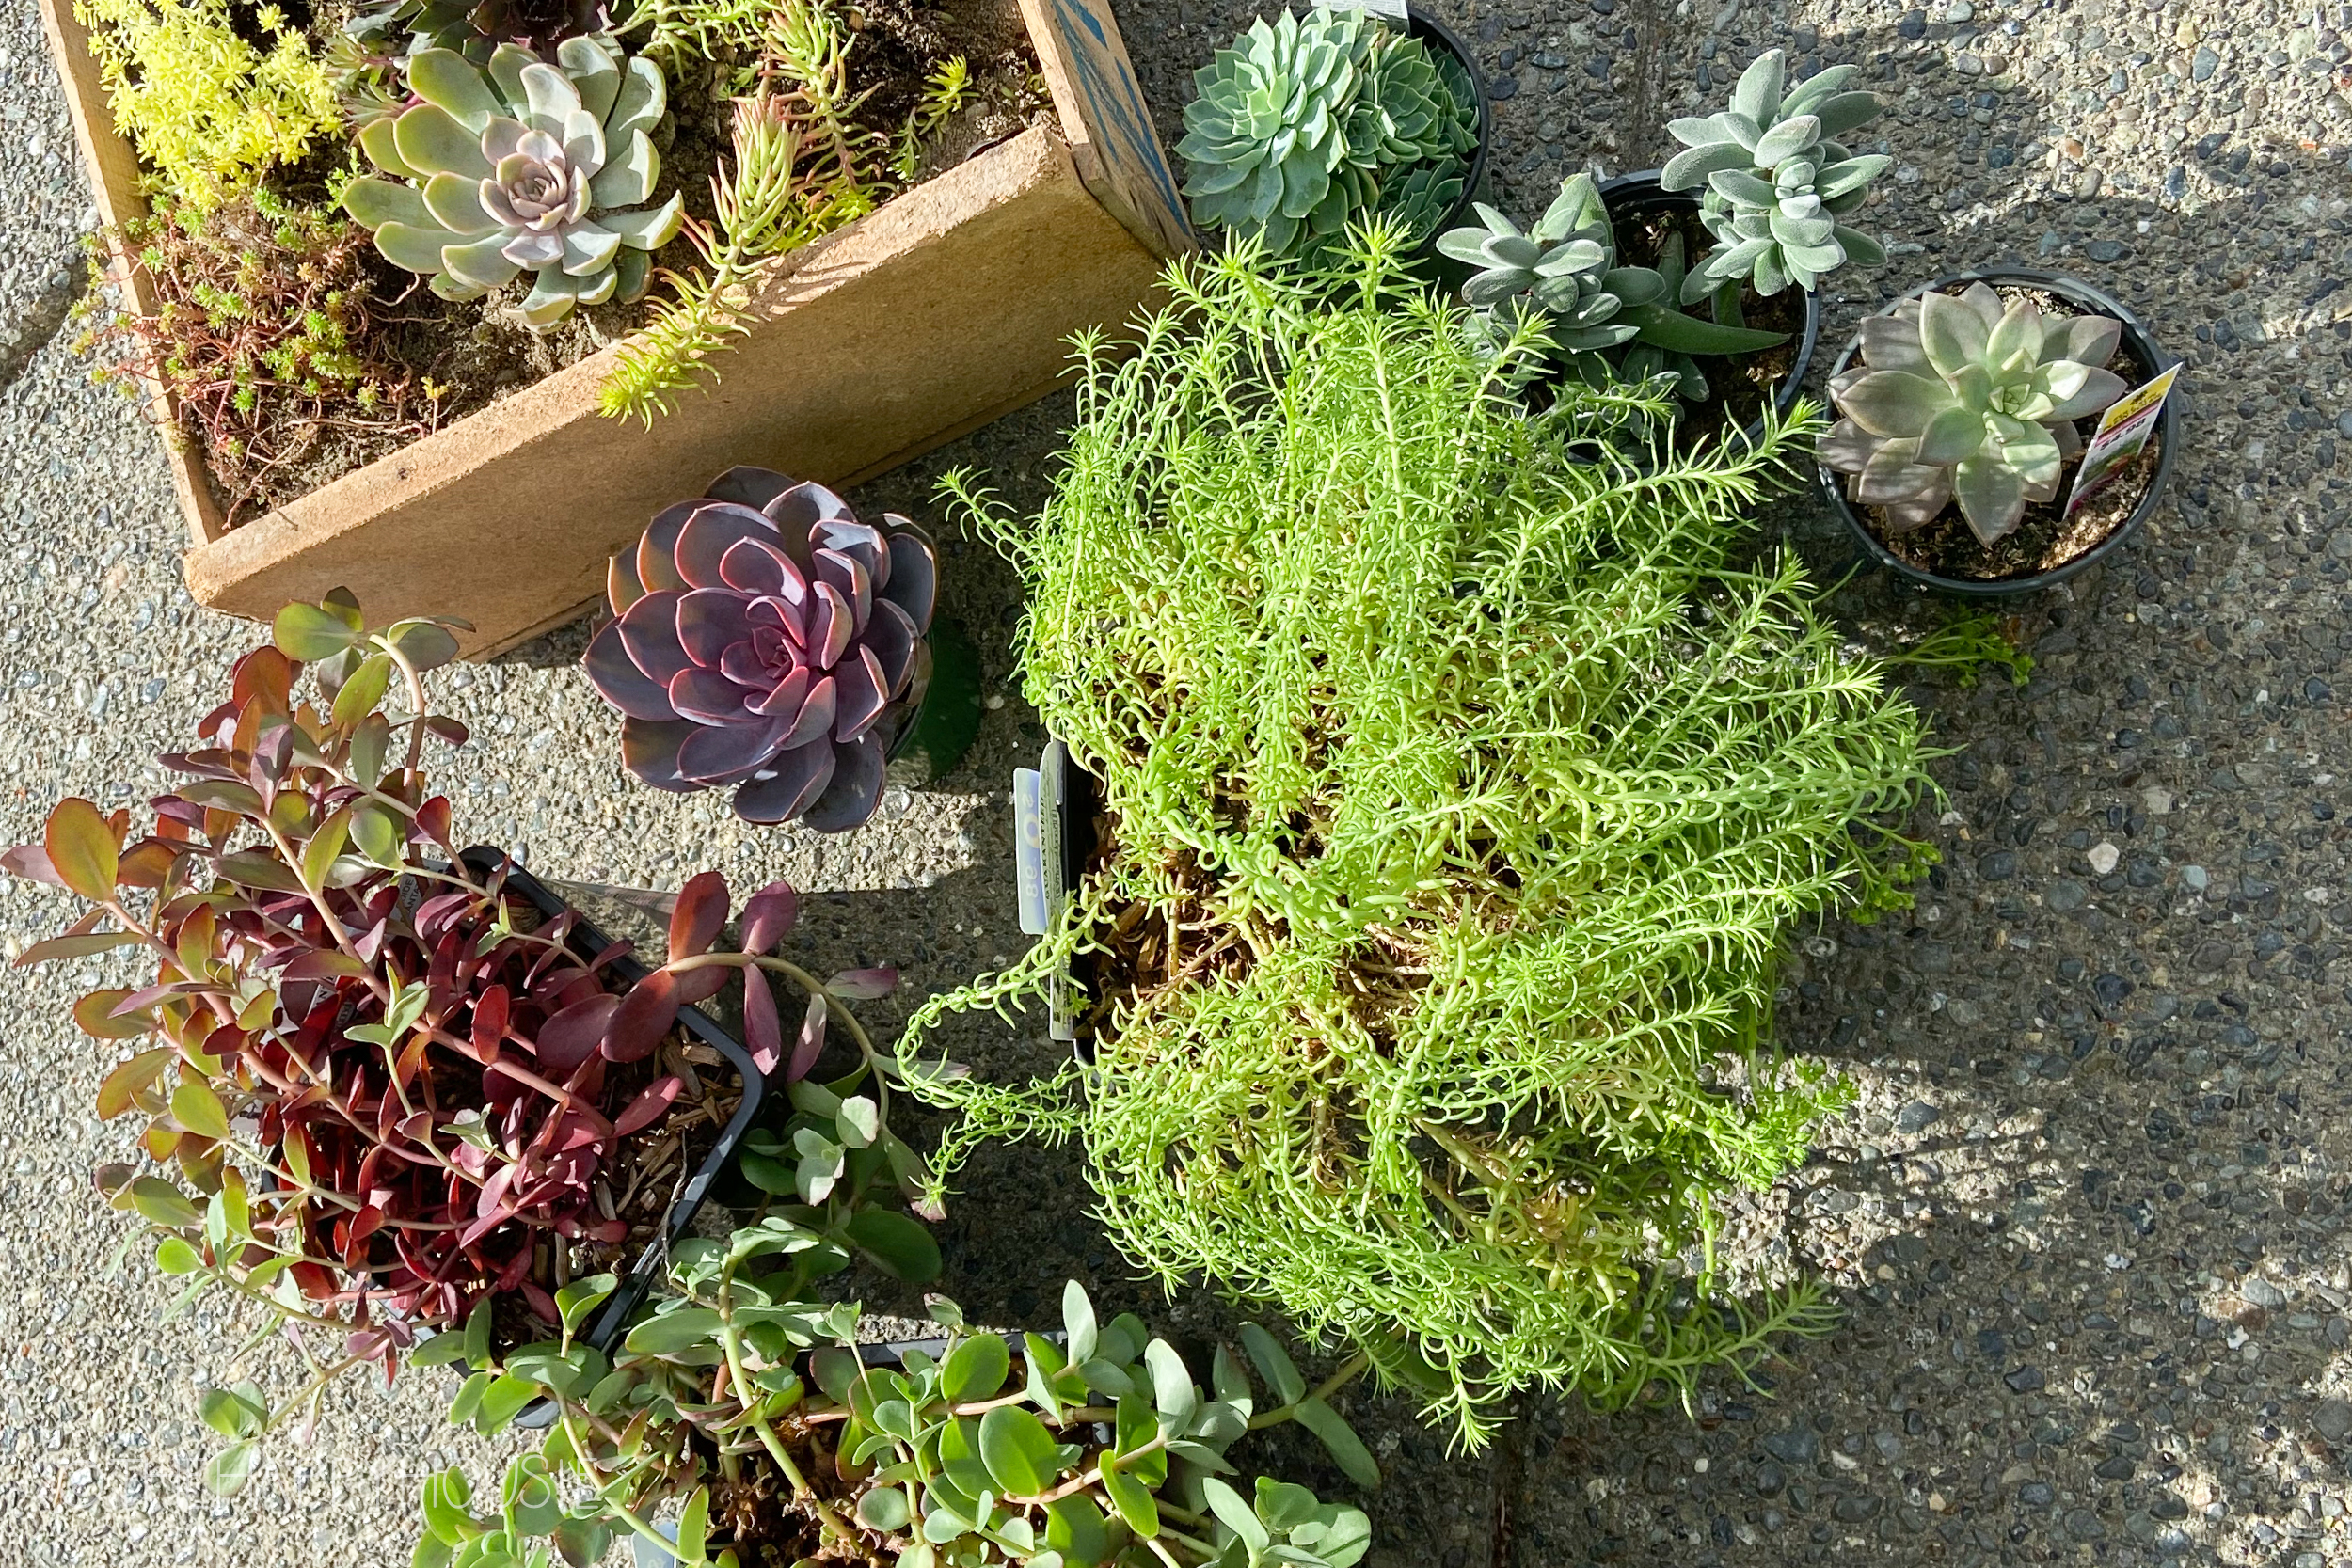 The succulents are on the ground outside.